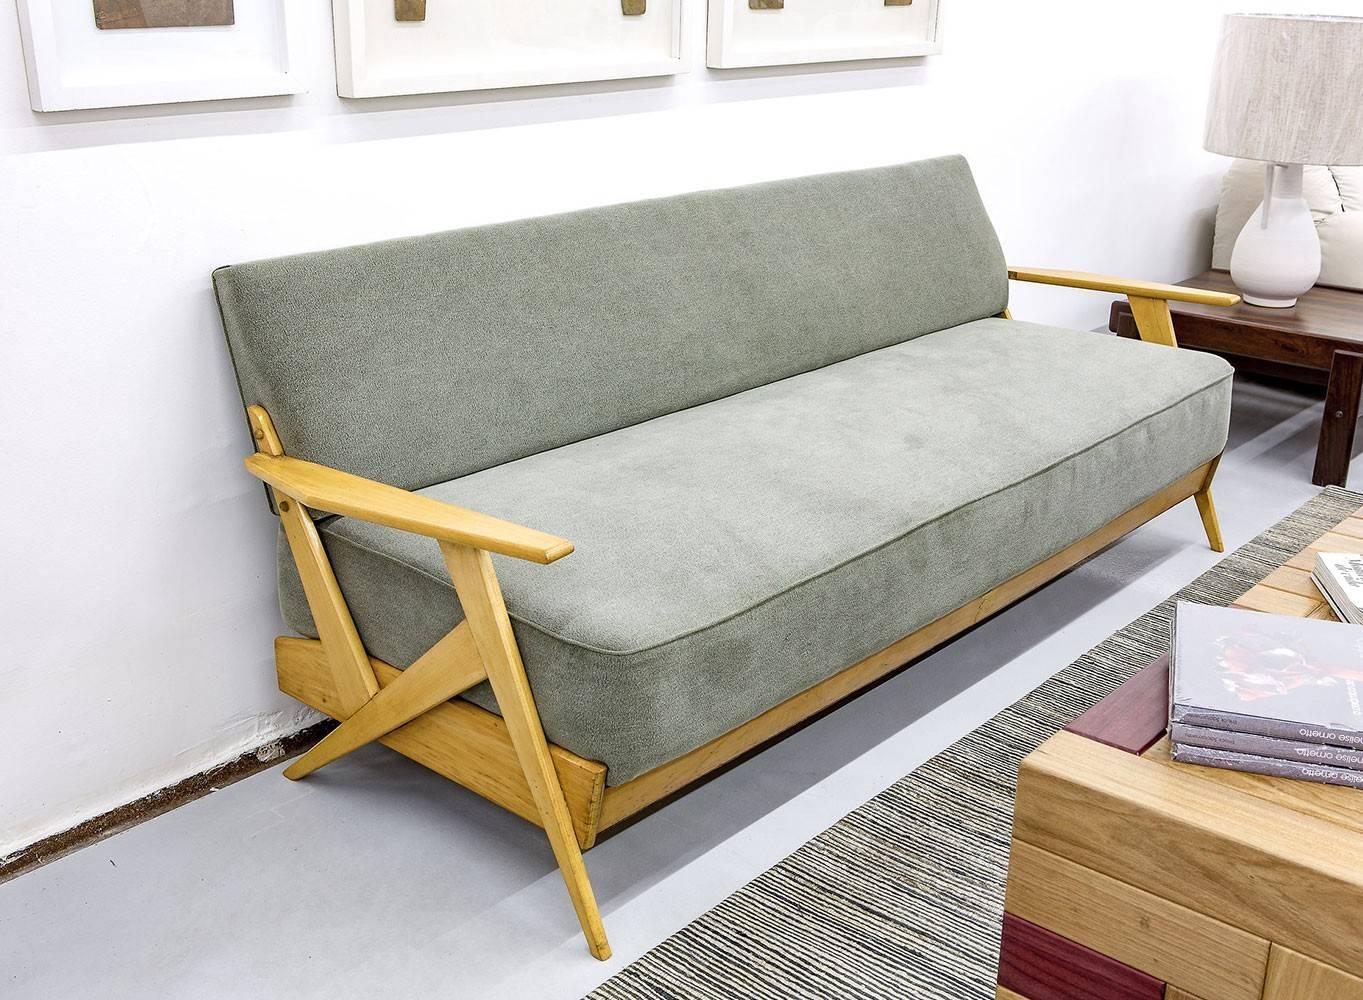 This midcentury sofa, in wood and grey fabric, was produced in the 1950s in São Paulo by Zanine's studio, is a good example of his earlier pieces.

José Zanine Caldas was a designer, architect and artist. His work is known for its intense creativity